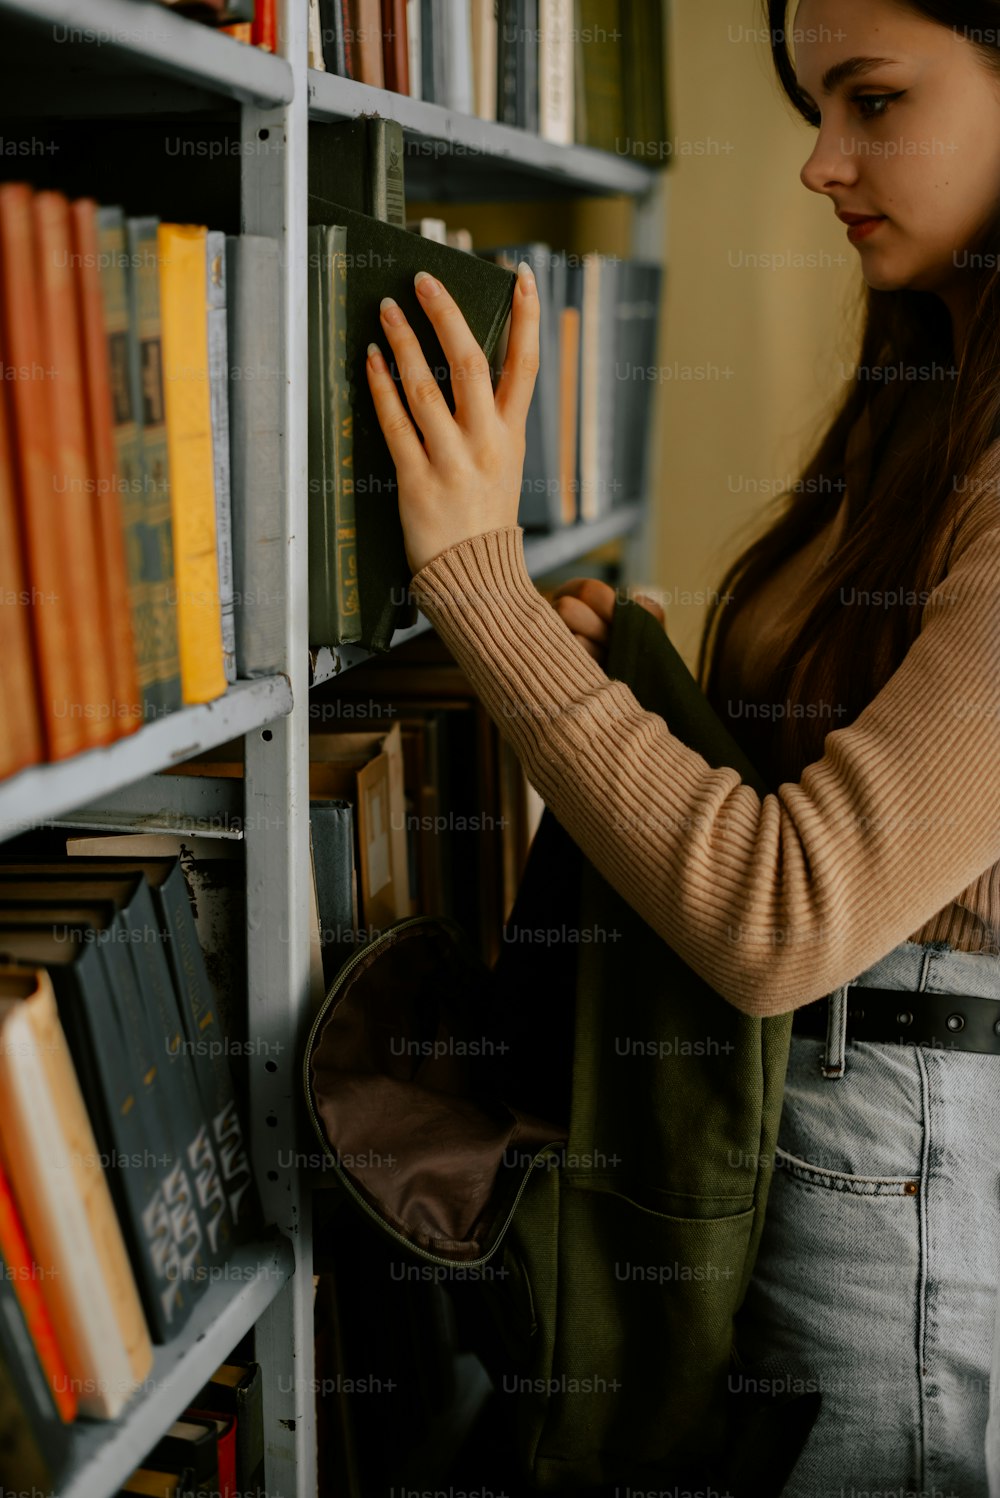 a woman is looking at books on a book shelf